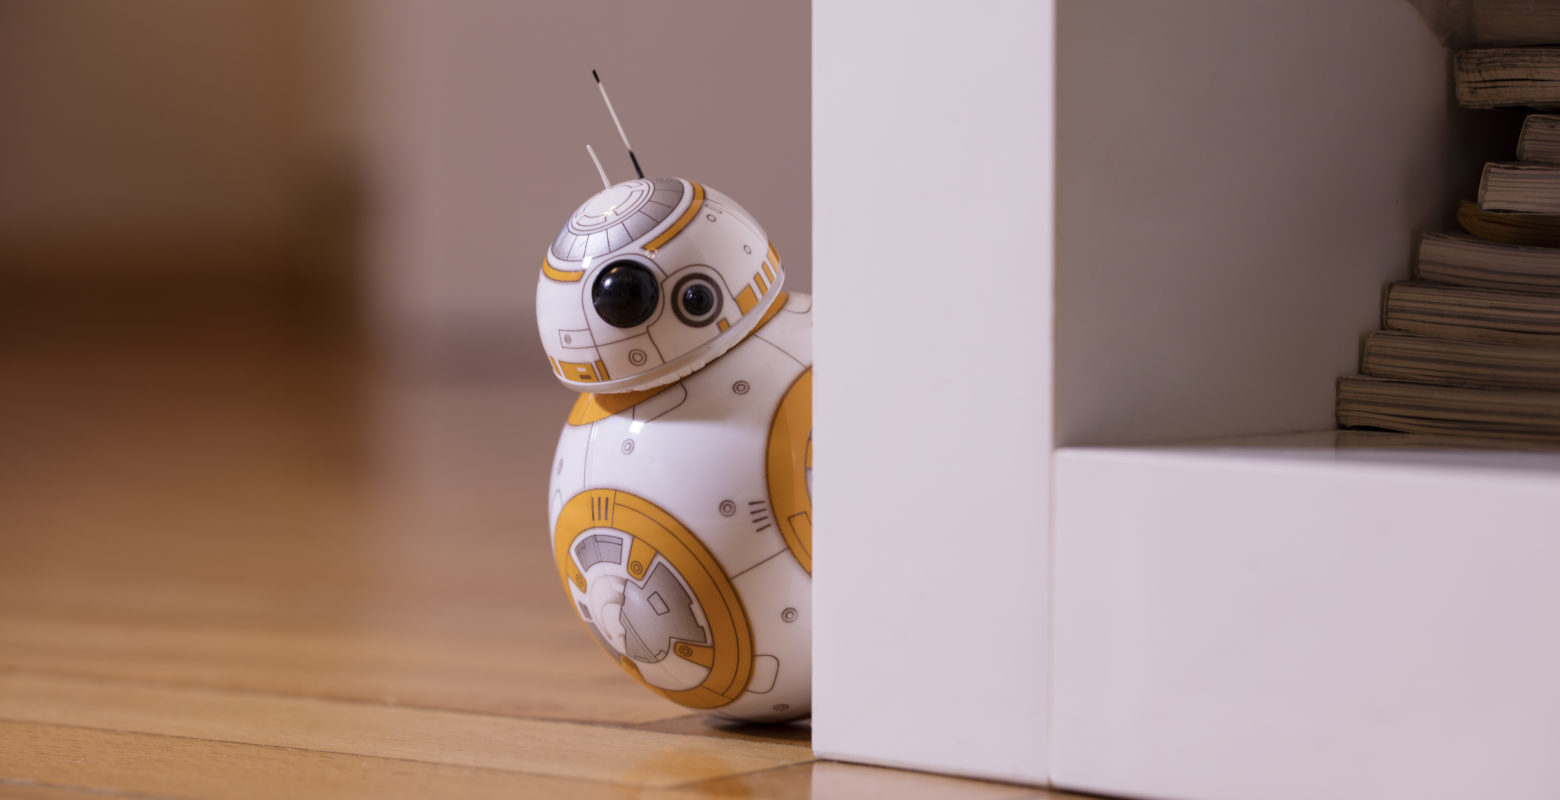 ?stanbul, Turkey - December 12, 2015: Portrait of BB-8 toy hiding behind a bookshelf. New droid of Star Wars movie appearing in The Force Awakens episode. BB-8 toy is produced by Sphero for Lucas Film.